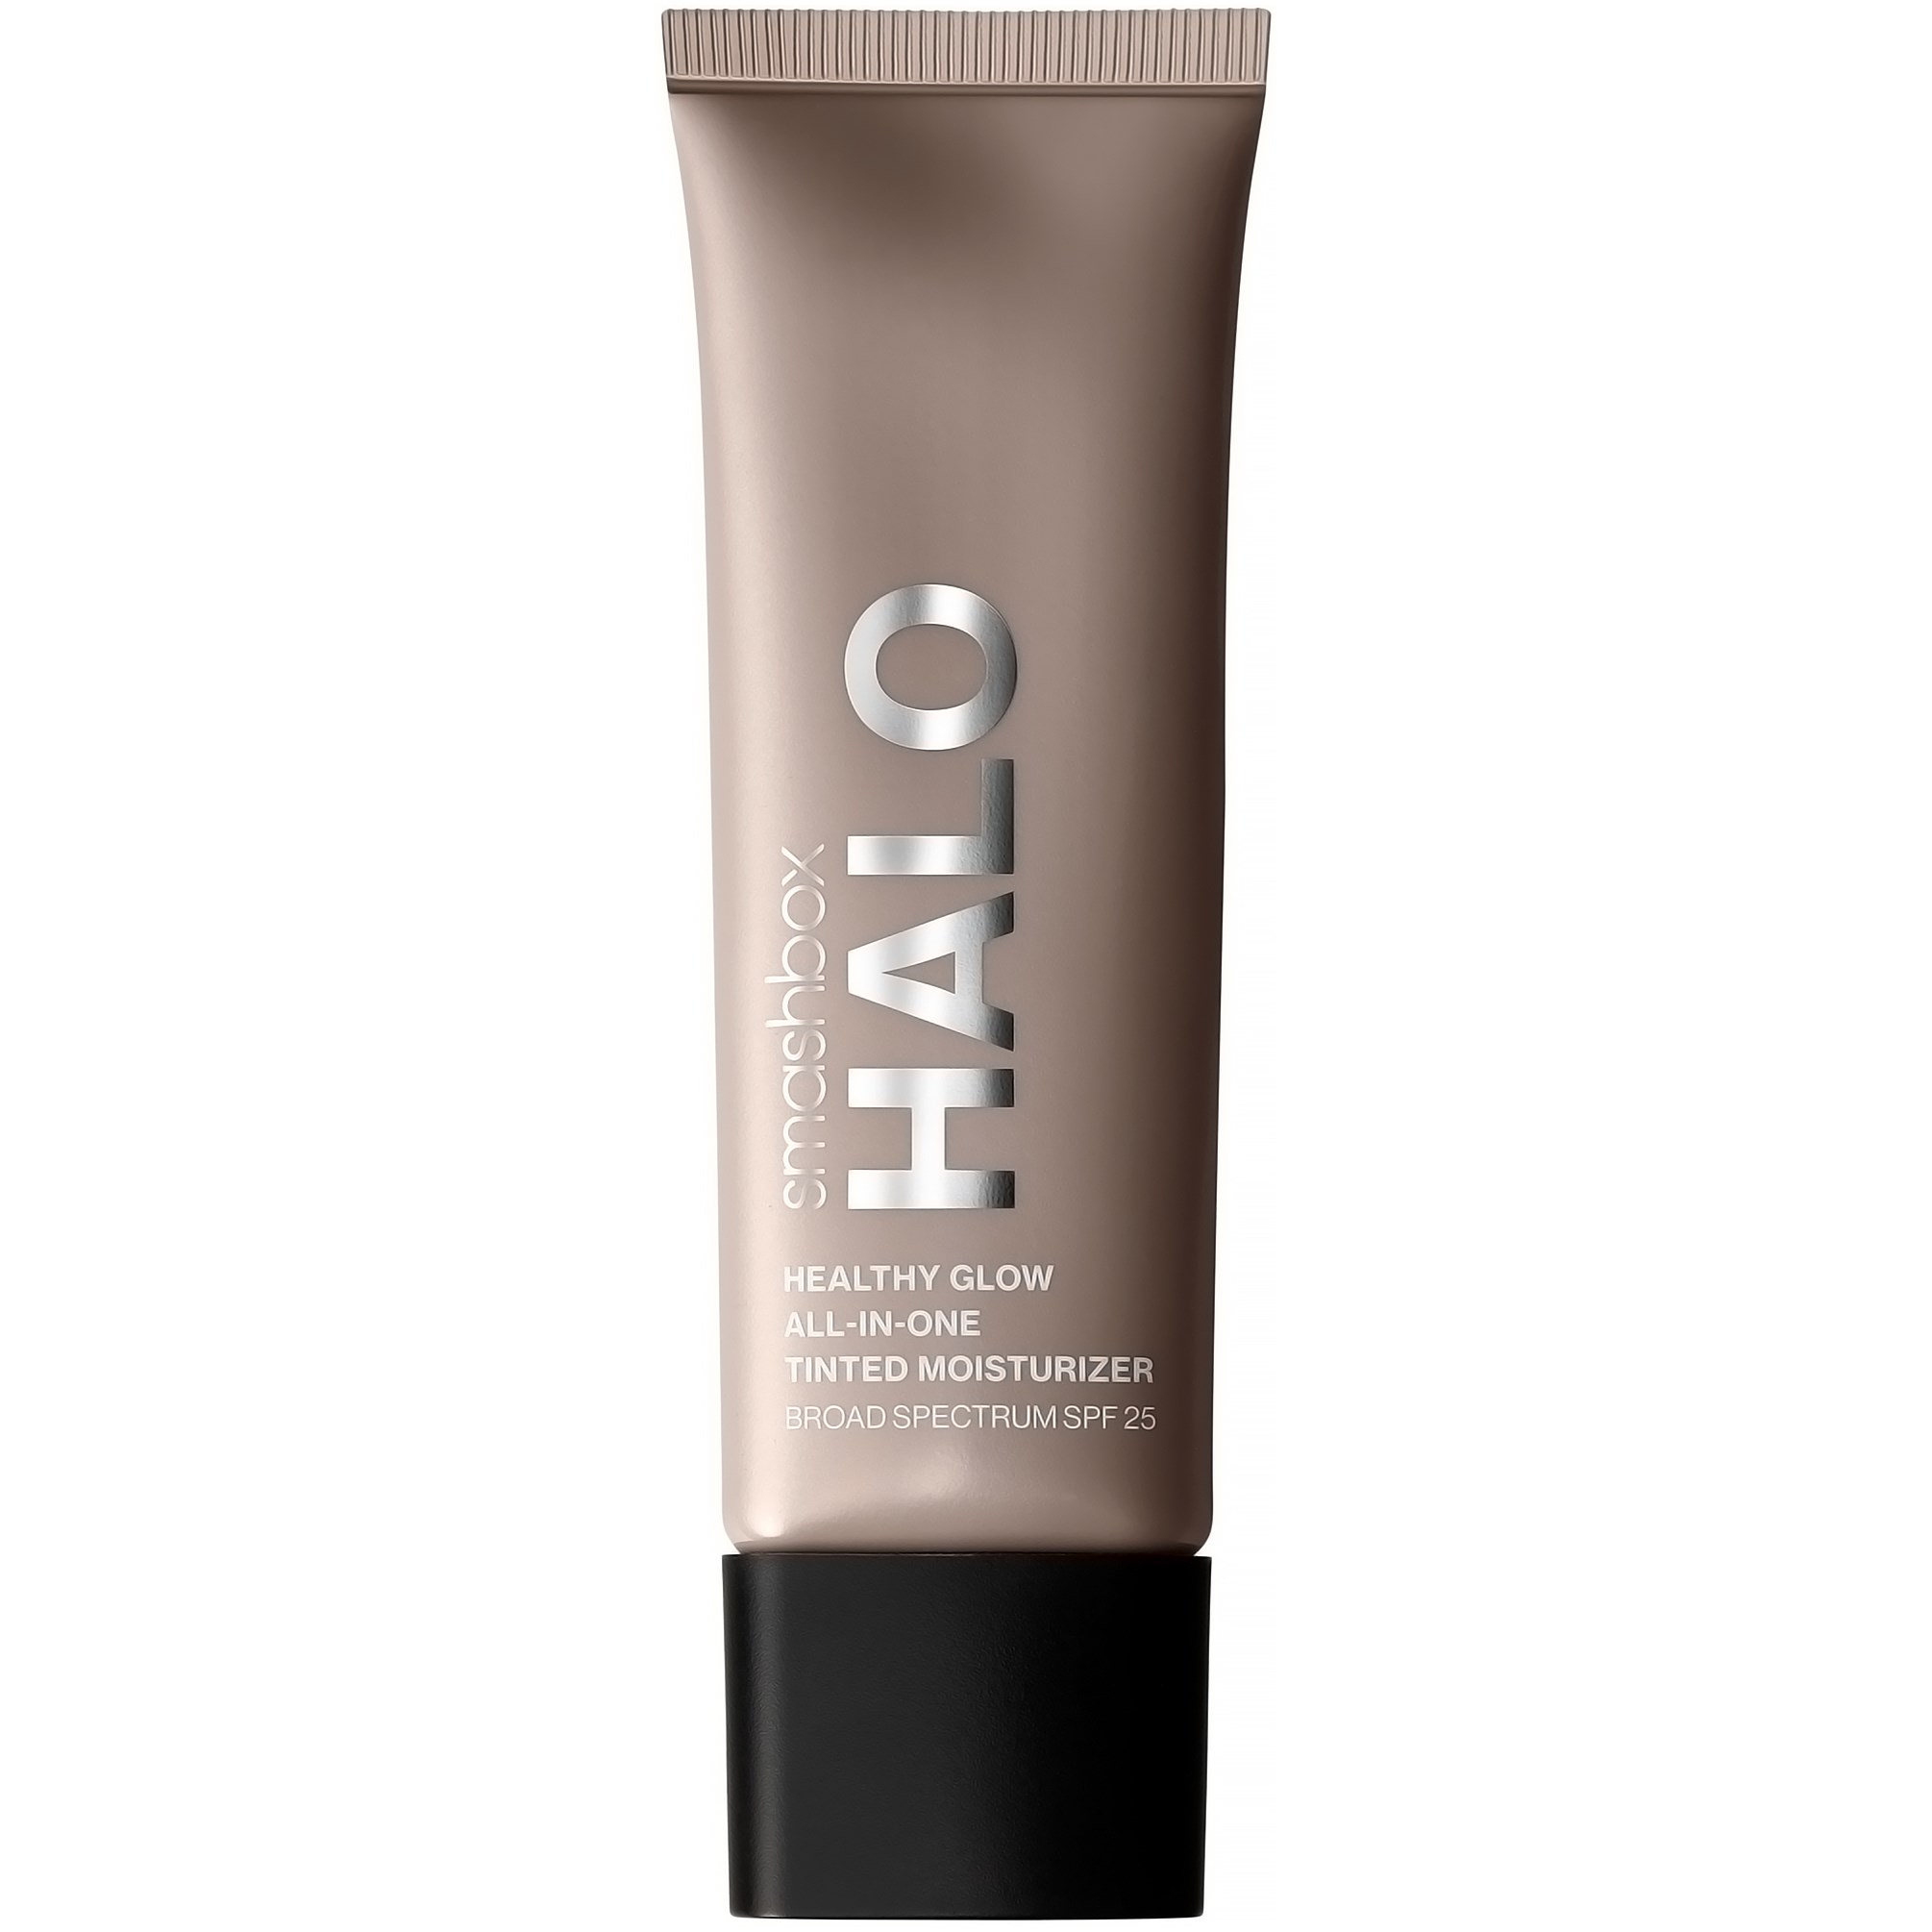 Smashbox Halo Healthy Glow All-In-One Tinted Moisturizer SPF 25 Light